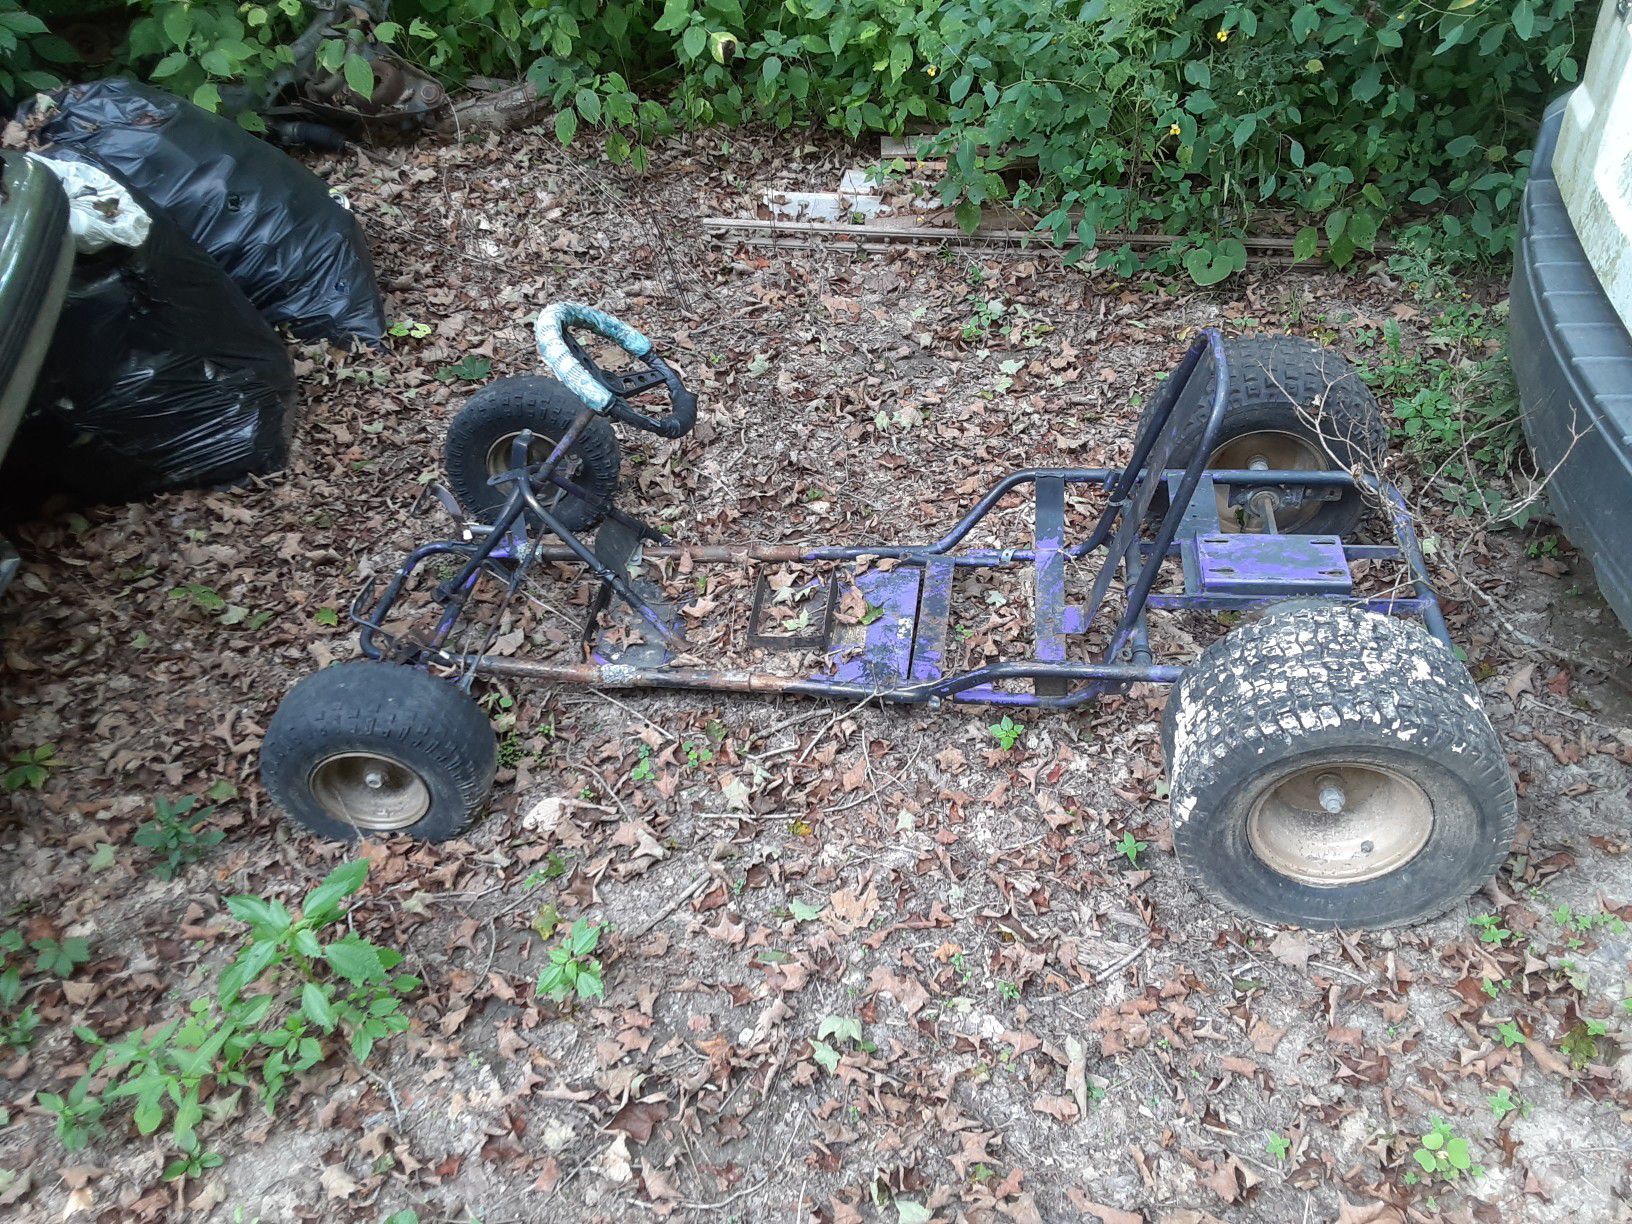 For sale or trade one 1 seater go kart frame